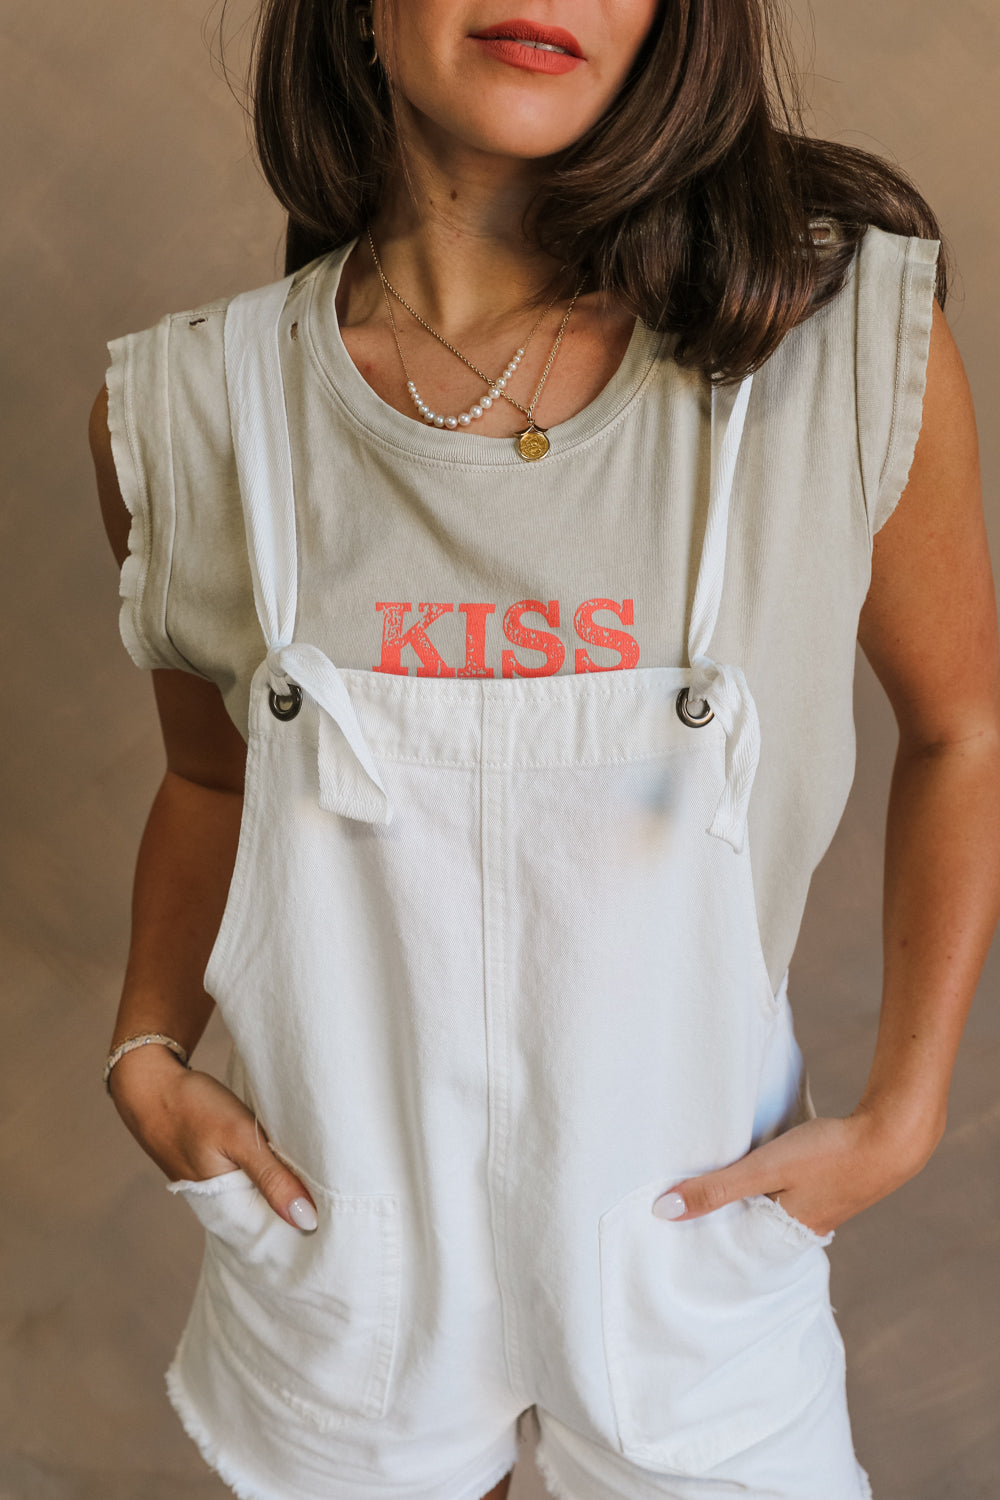 Close up view of female model wearing the Kassidy White Denim Sleeveless Romper which features White Cotton Fabric, Two Front Pockets, Two Back Pockets, Fray Hem, Adjustable Tie Straps and Sleeveless